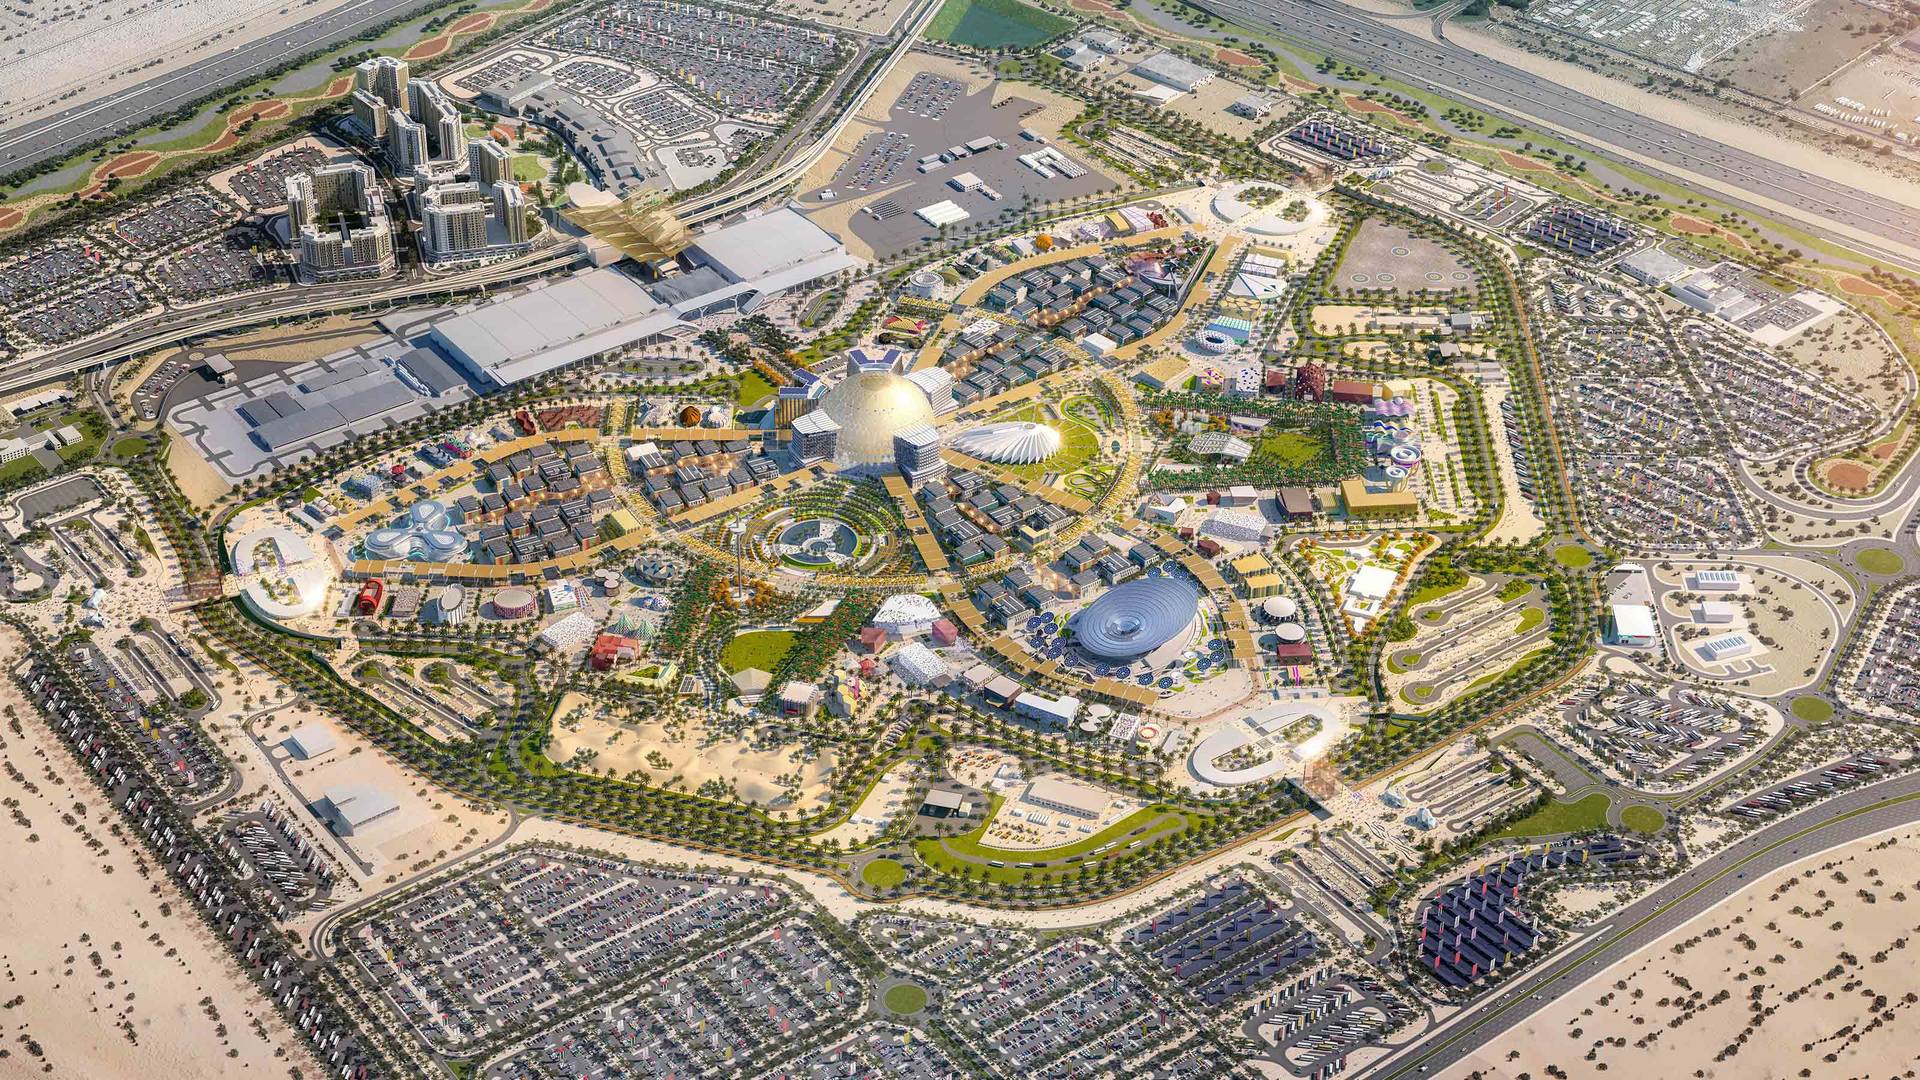 An aerial rendering of the fairgrounds at Expo 2020 Dubai